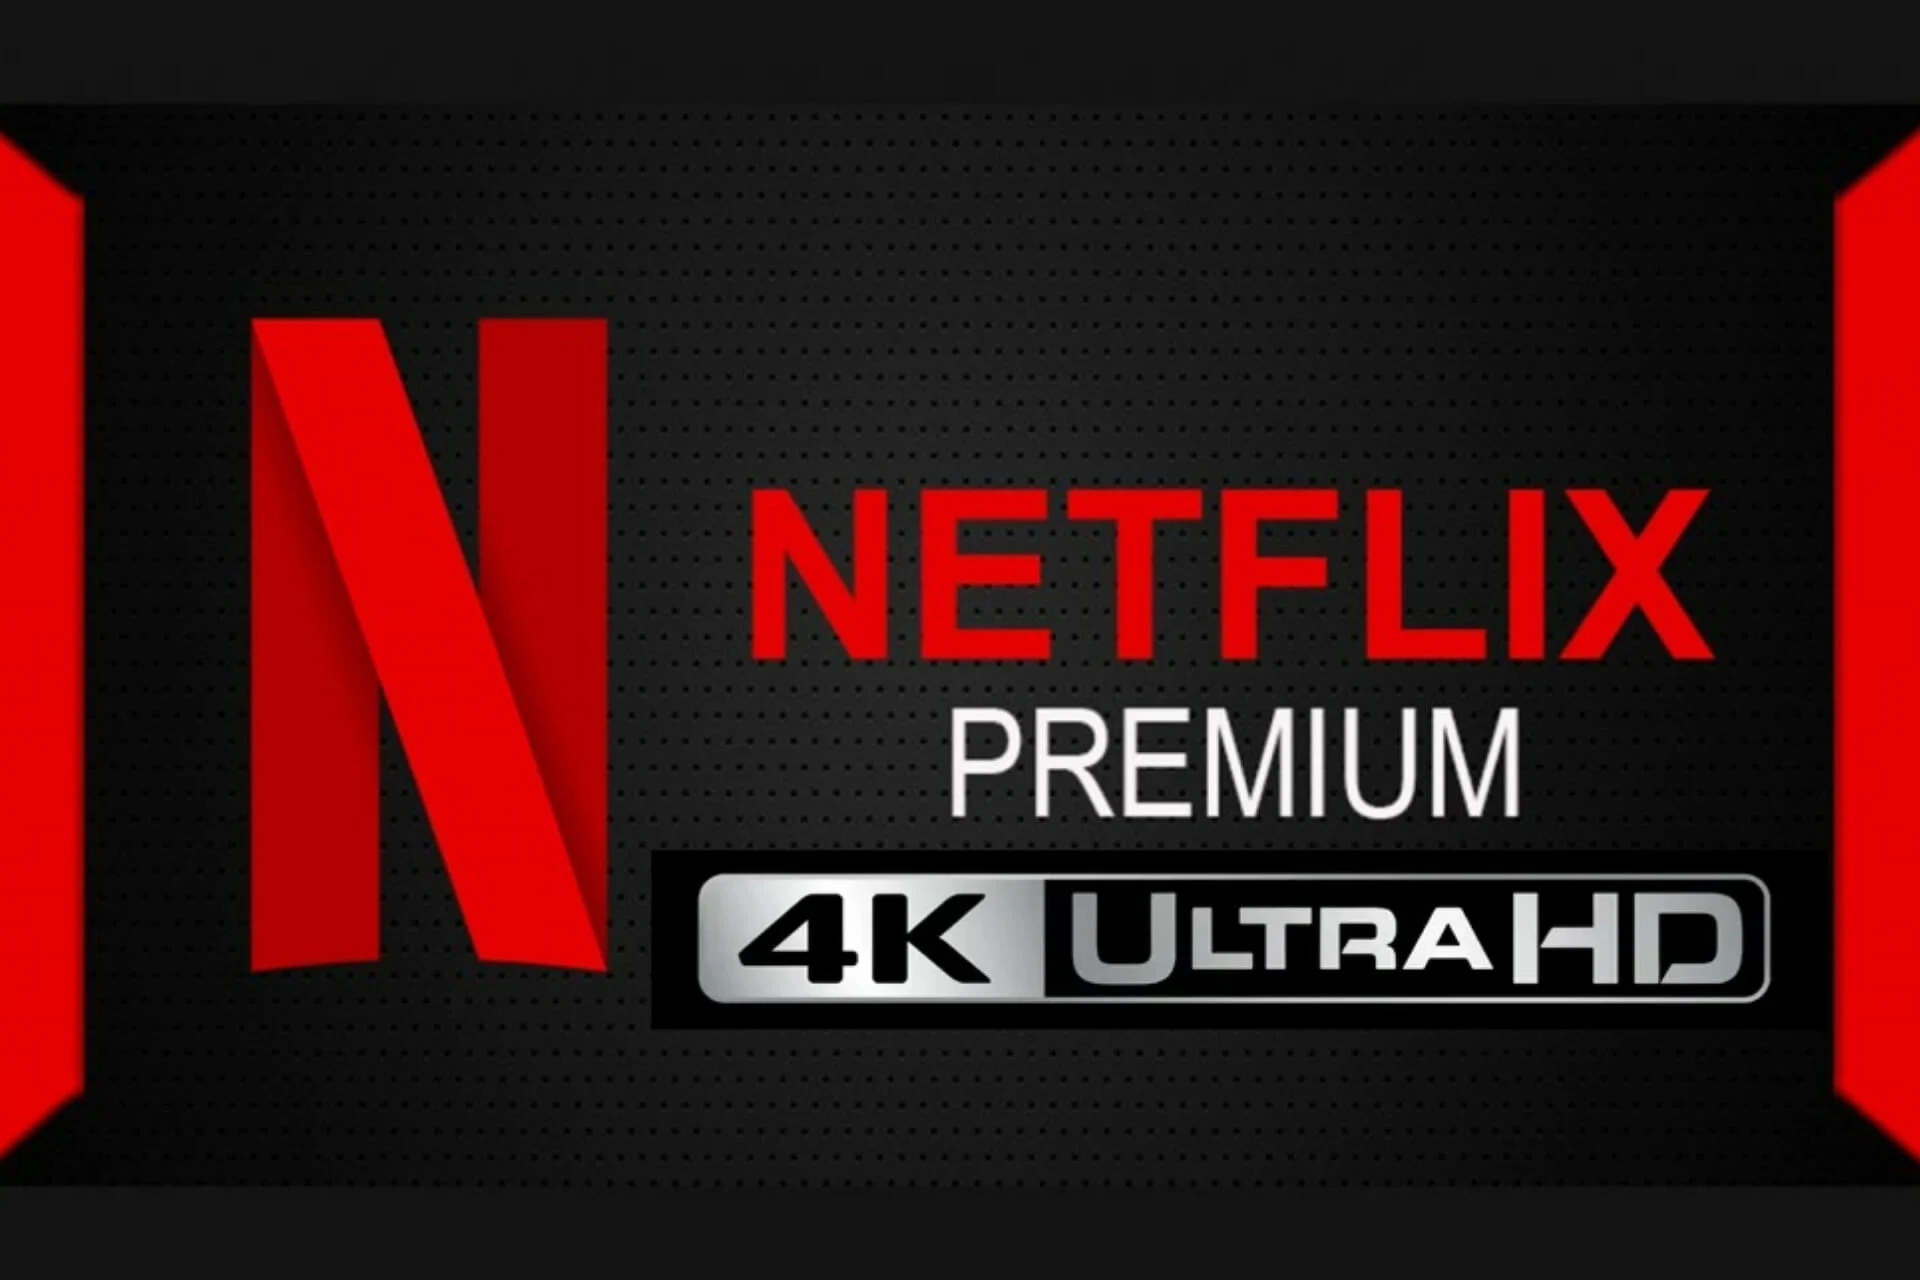 How To Watch 4K On Netflix